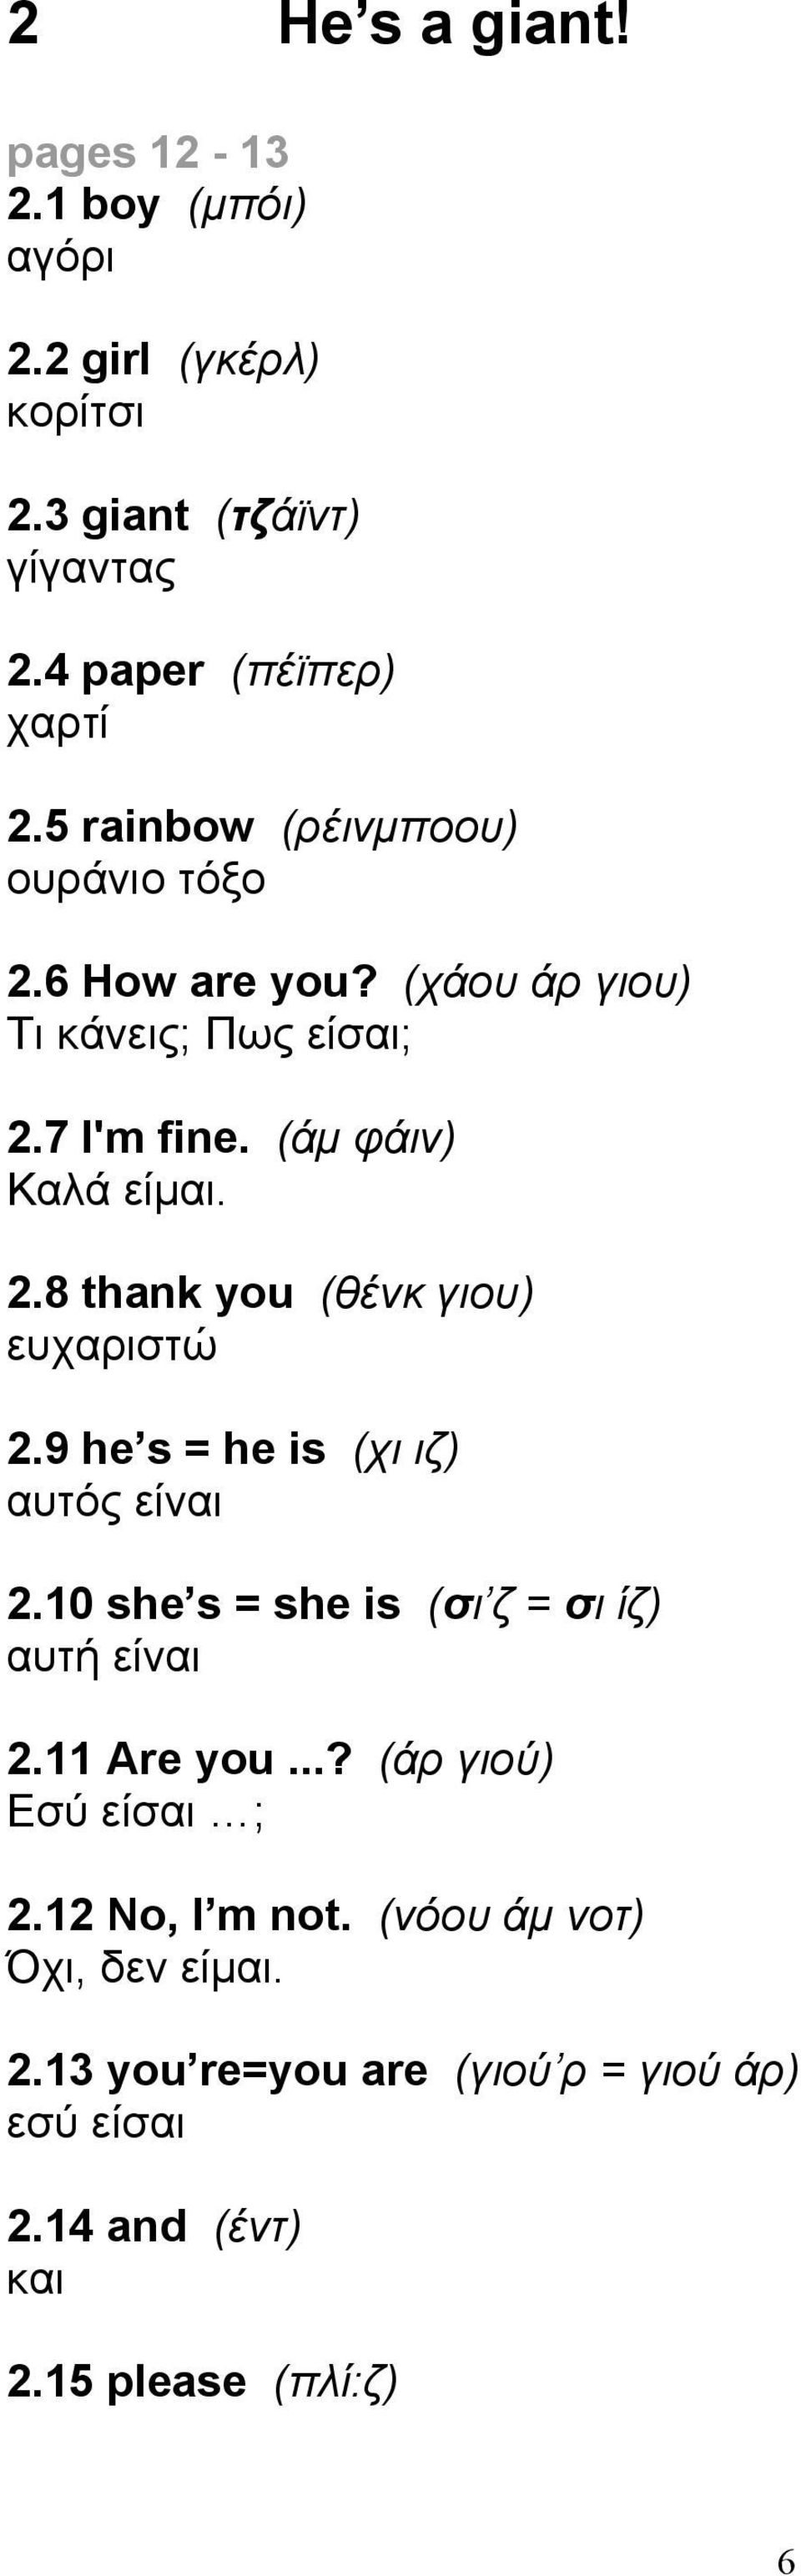 9 he s = he is (χι ιζ) αυτός είναι 2.10 she s = she is (σι ζ = σι ίζ) αυτή είναι 2.11 Are you...? (άρ γιού) Εσύ είσαι ; 2.12 No, I m not.